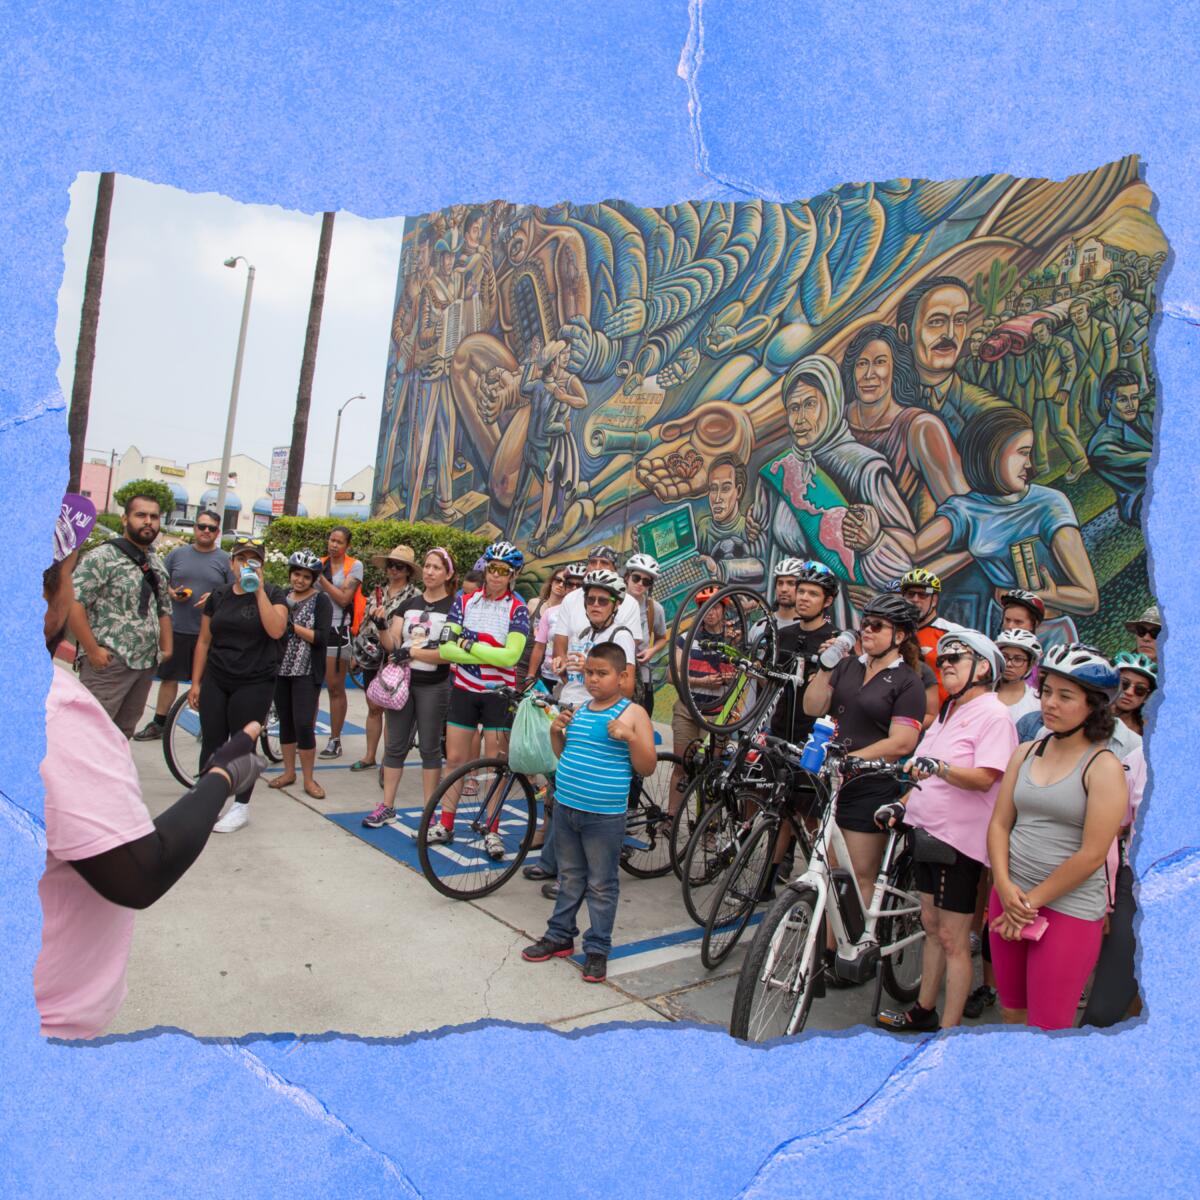 People with bikes stand in front of a large outdoor mural.